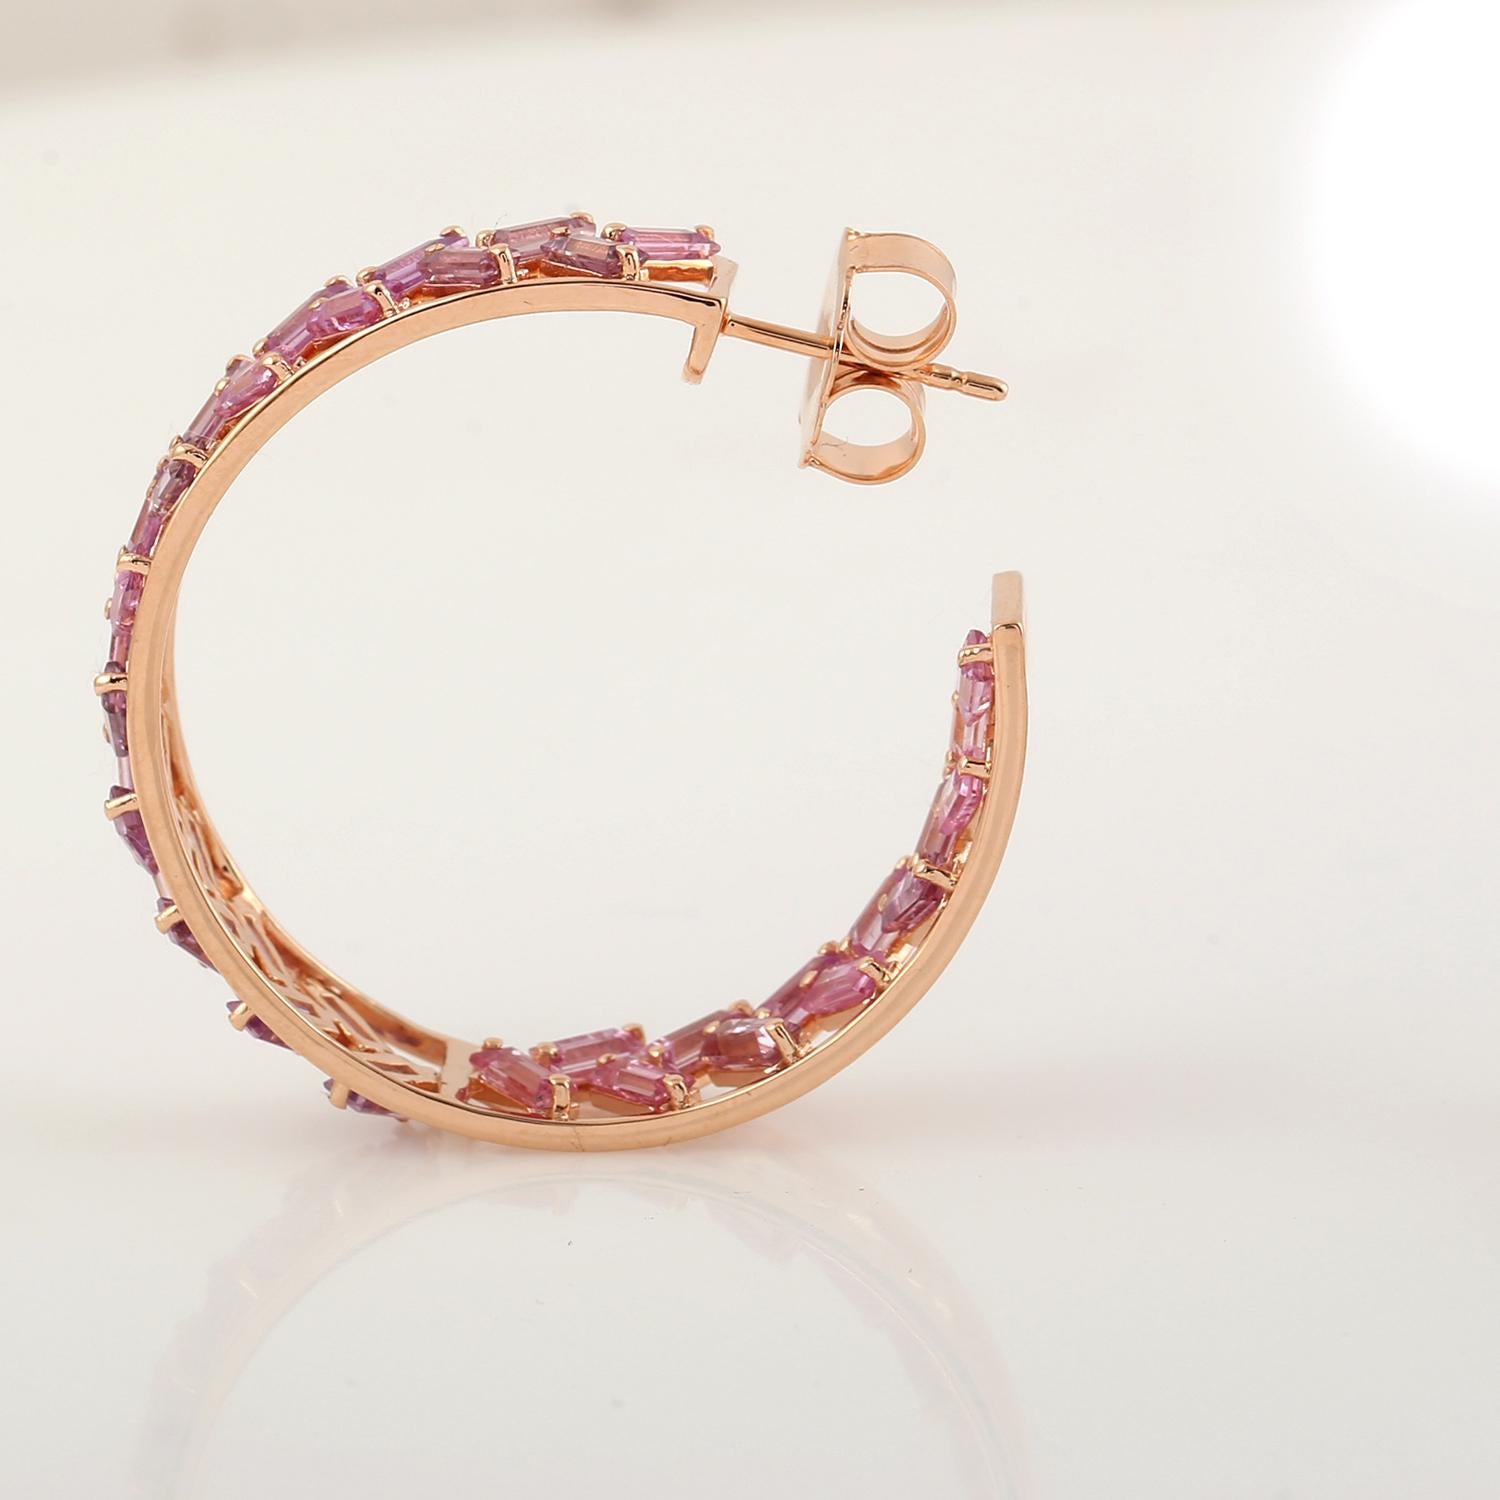 Mixed Cut 11.81 ct Baguette Shaped Pink Sapphire Hoop Earrings Made In 18K Rose Gold For Sale